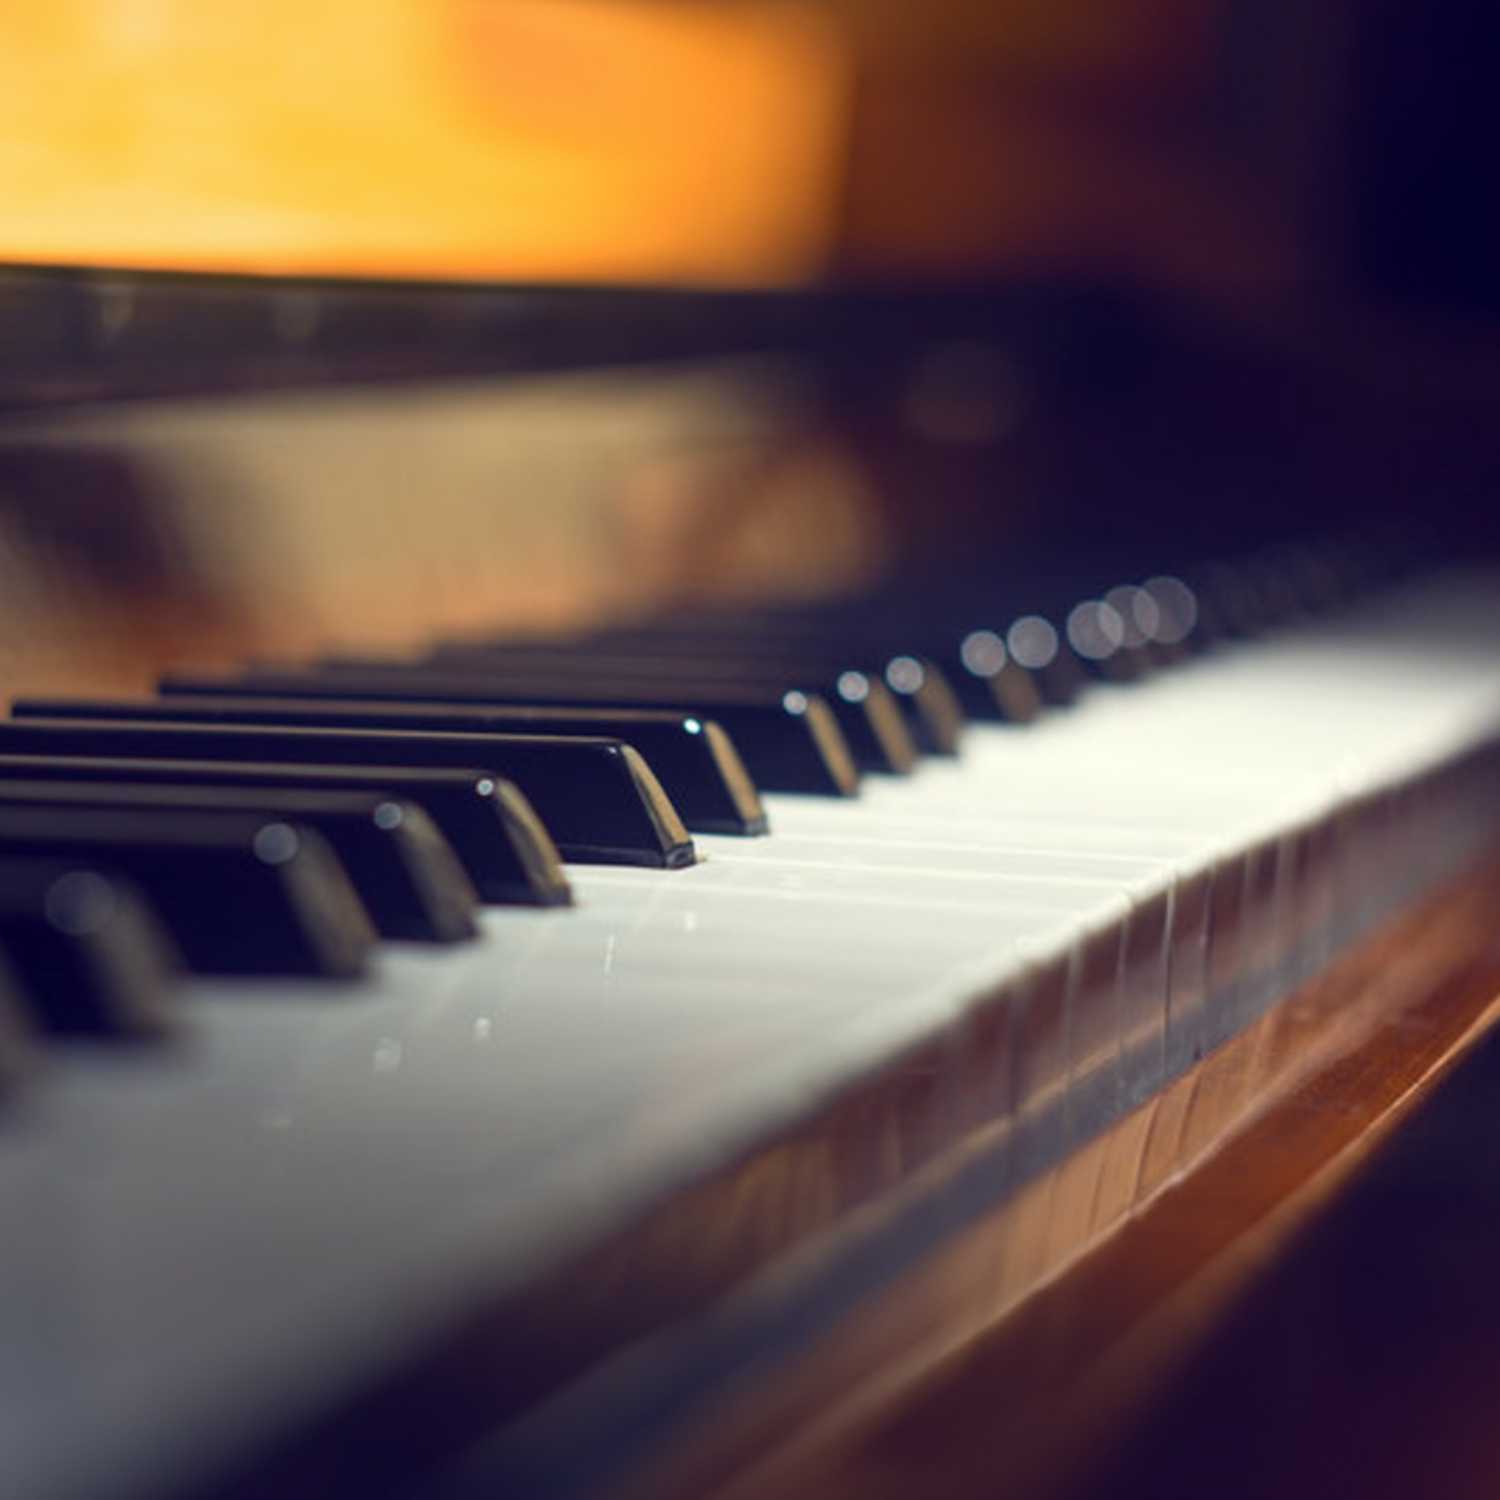 Tuning into Patient Care: The Effects of Piano Music During Colonoscopies